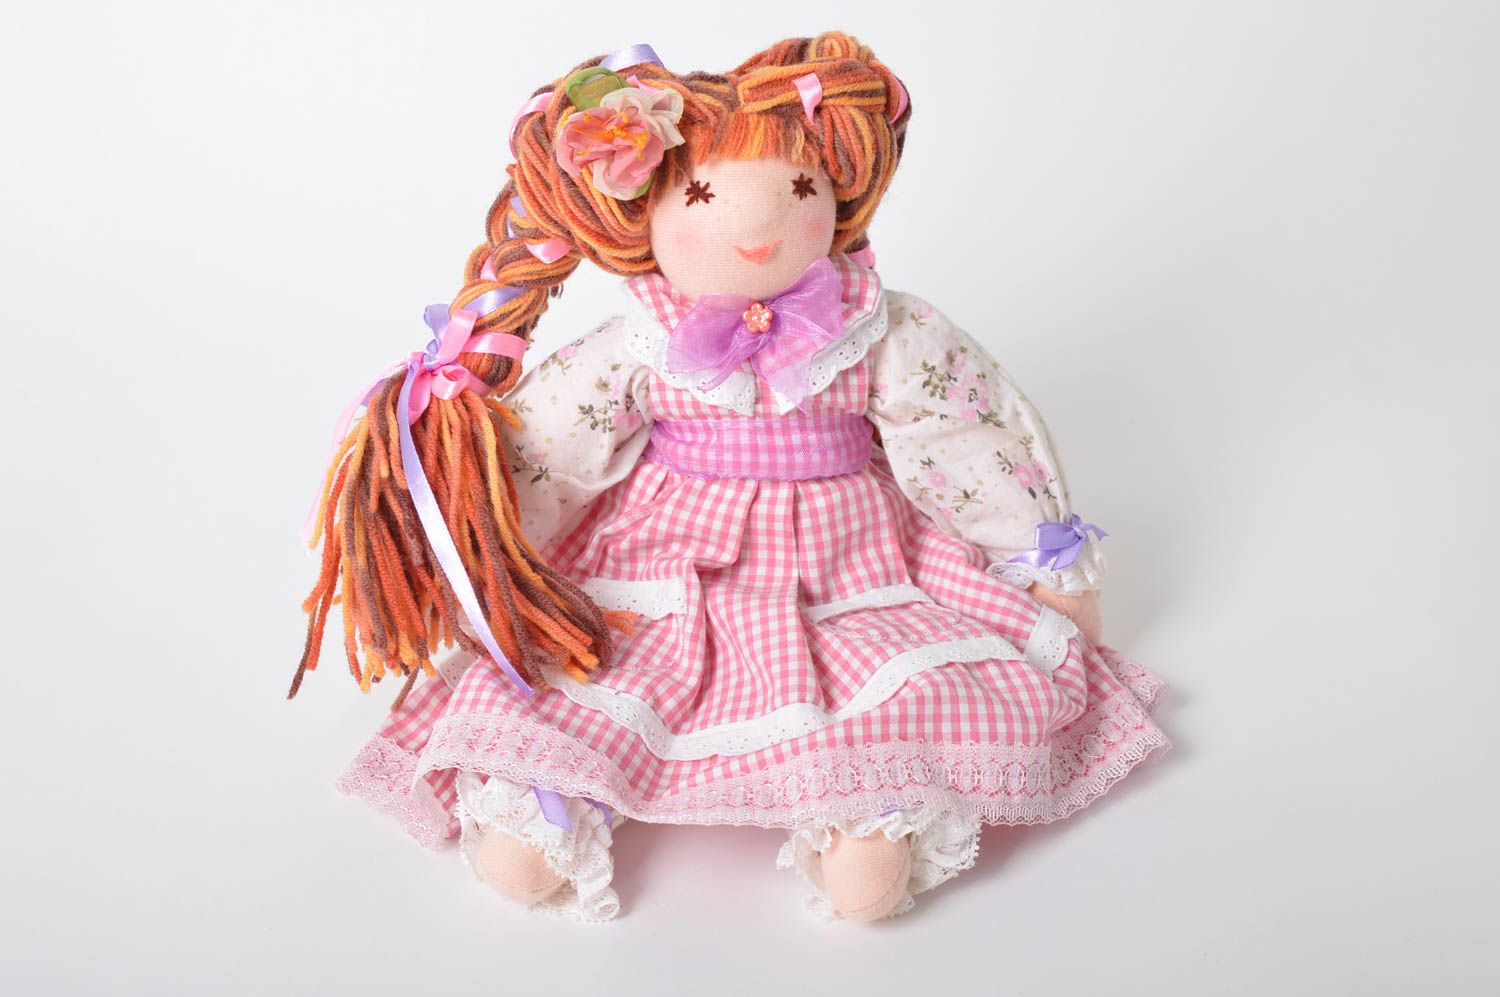 Handmade soft toy girl doll nursery decor kids gifts for decorative use only photo 2